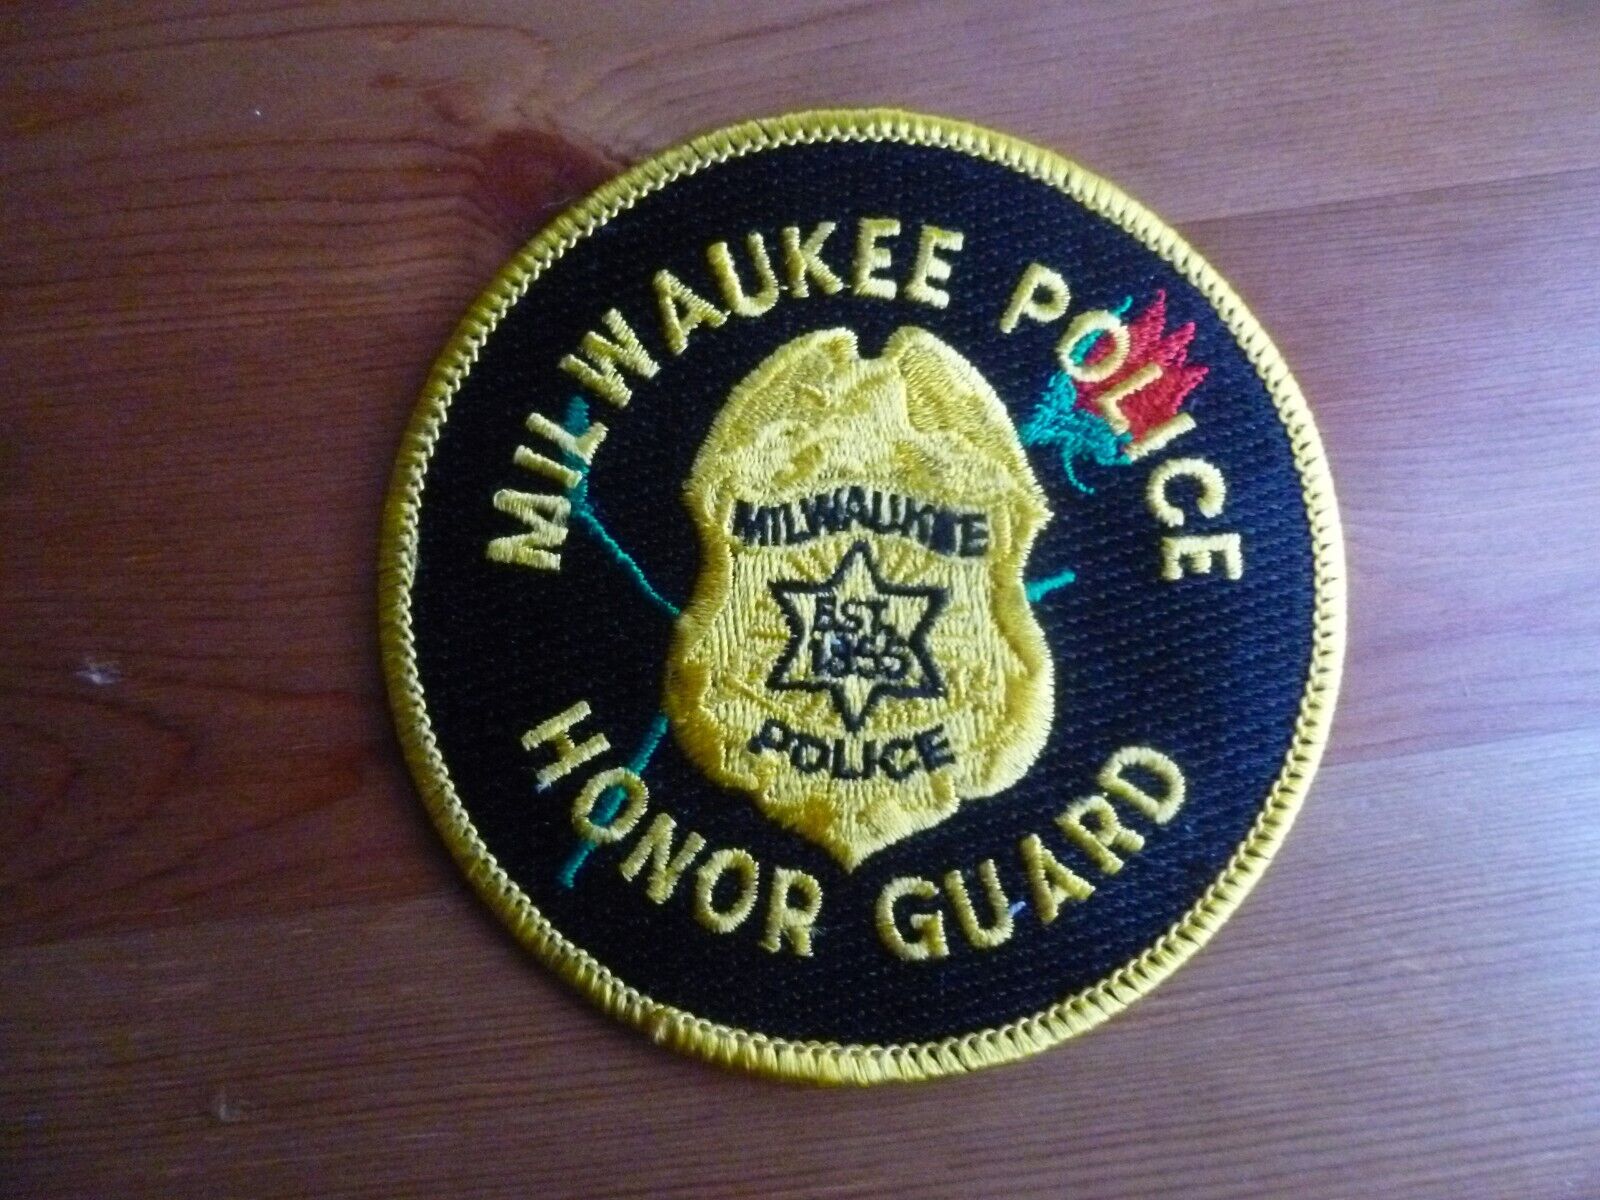 MILWAUKEE WISCONSIN HONOR GUARD POLICE Shoulder Patch Unit Obsolete Original